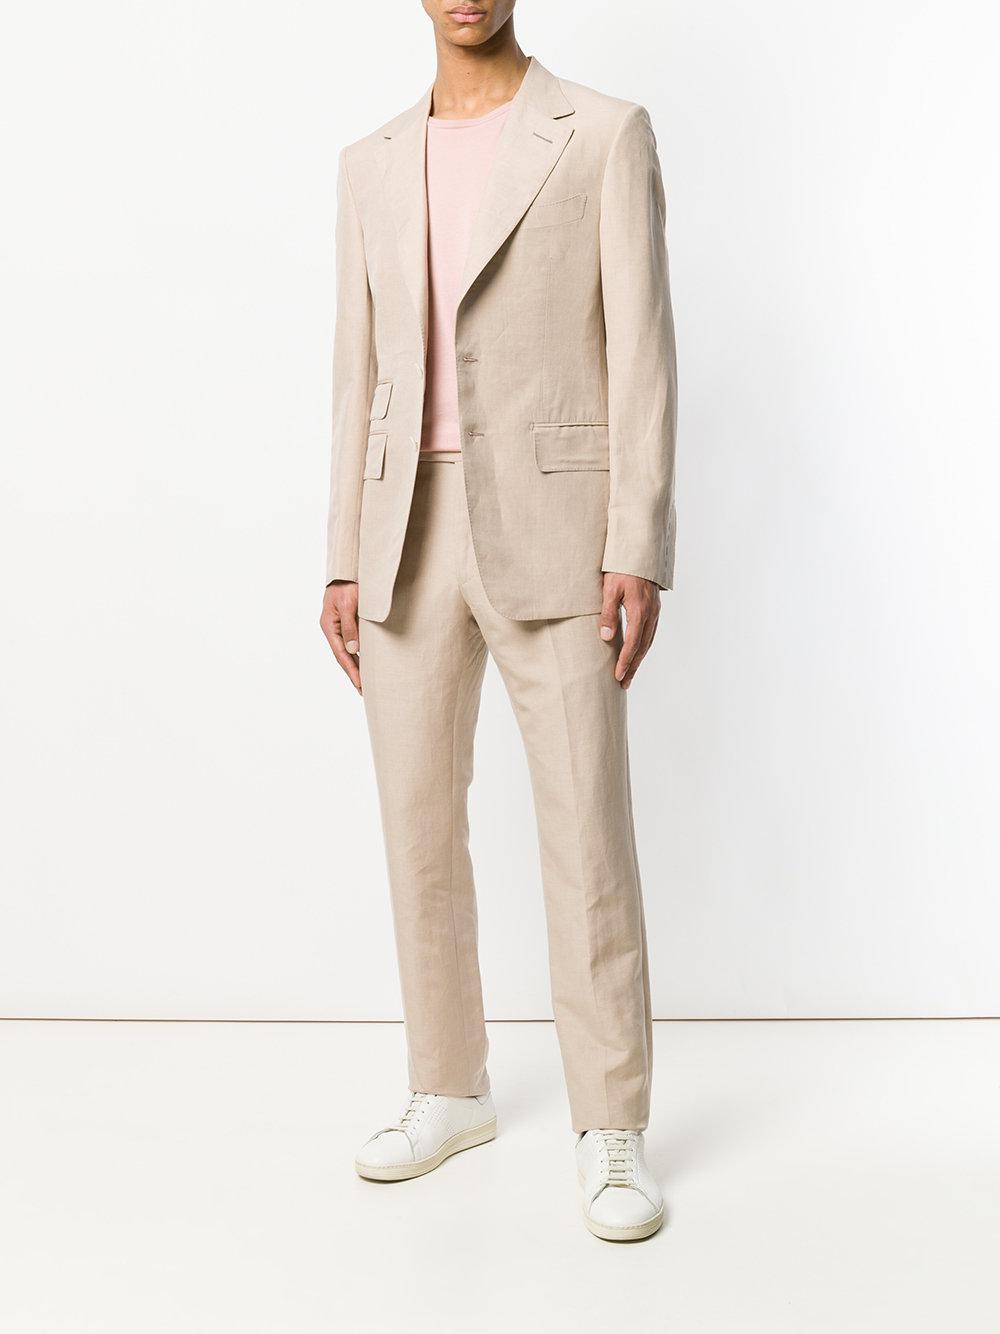 Tom Ford Linen Straight-fit Two Piece Suit in Natural for Men - Lyst